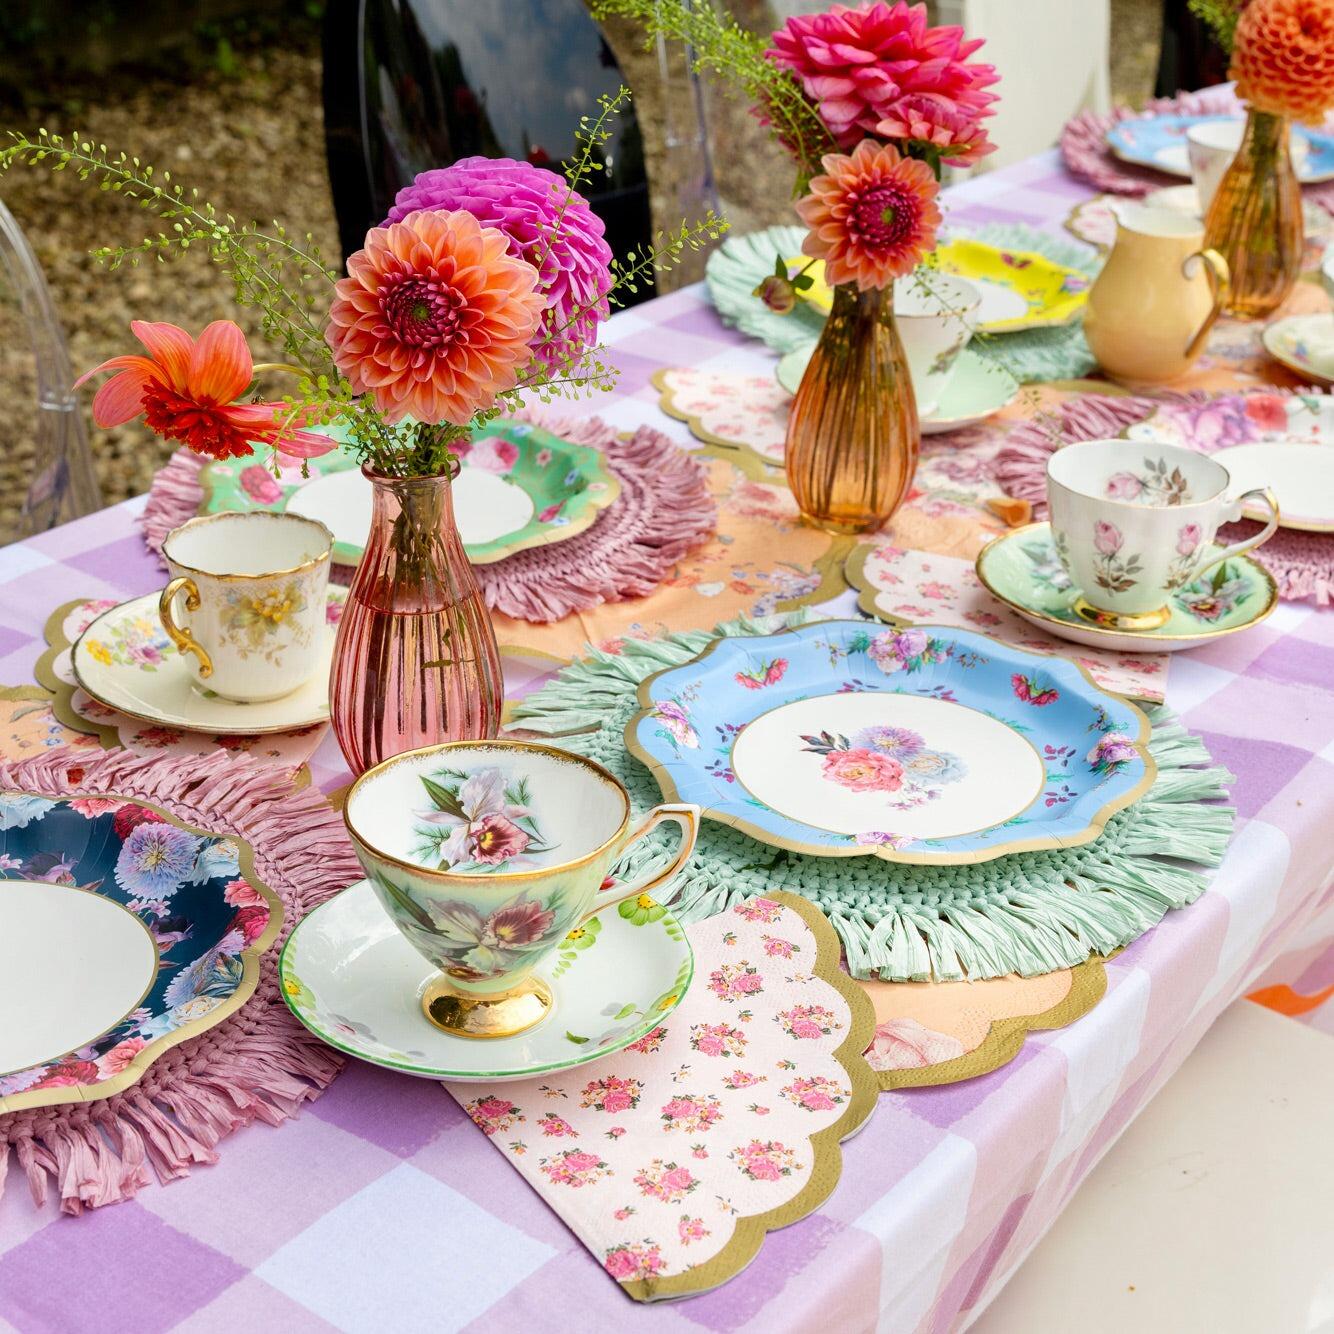 Handcrafted pink raffia placemat garden tea party